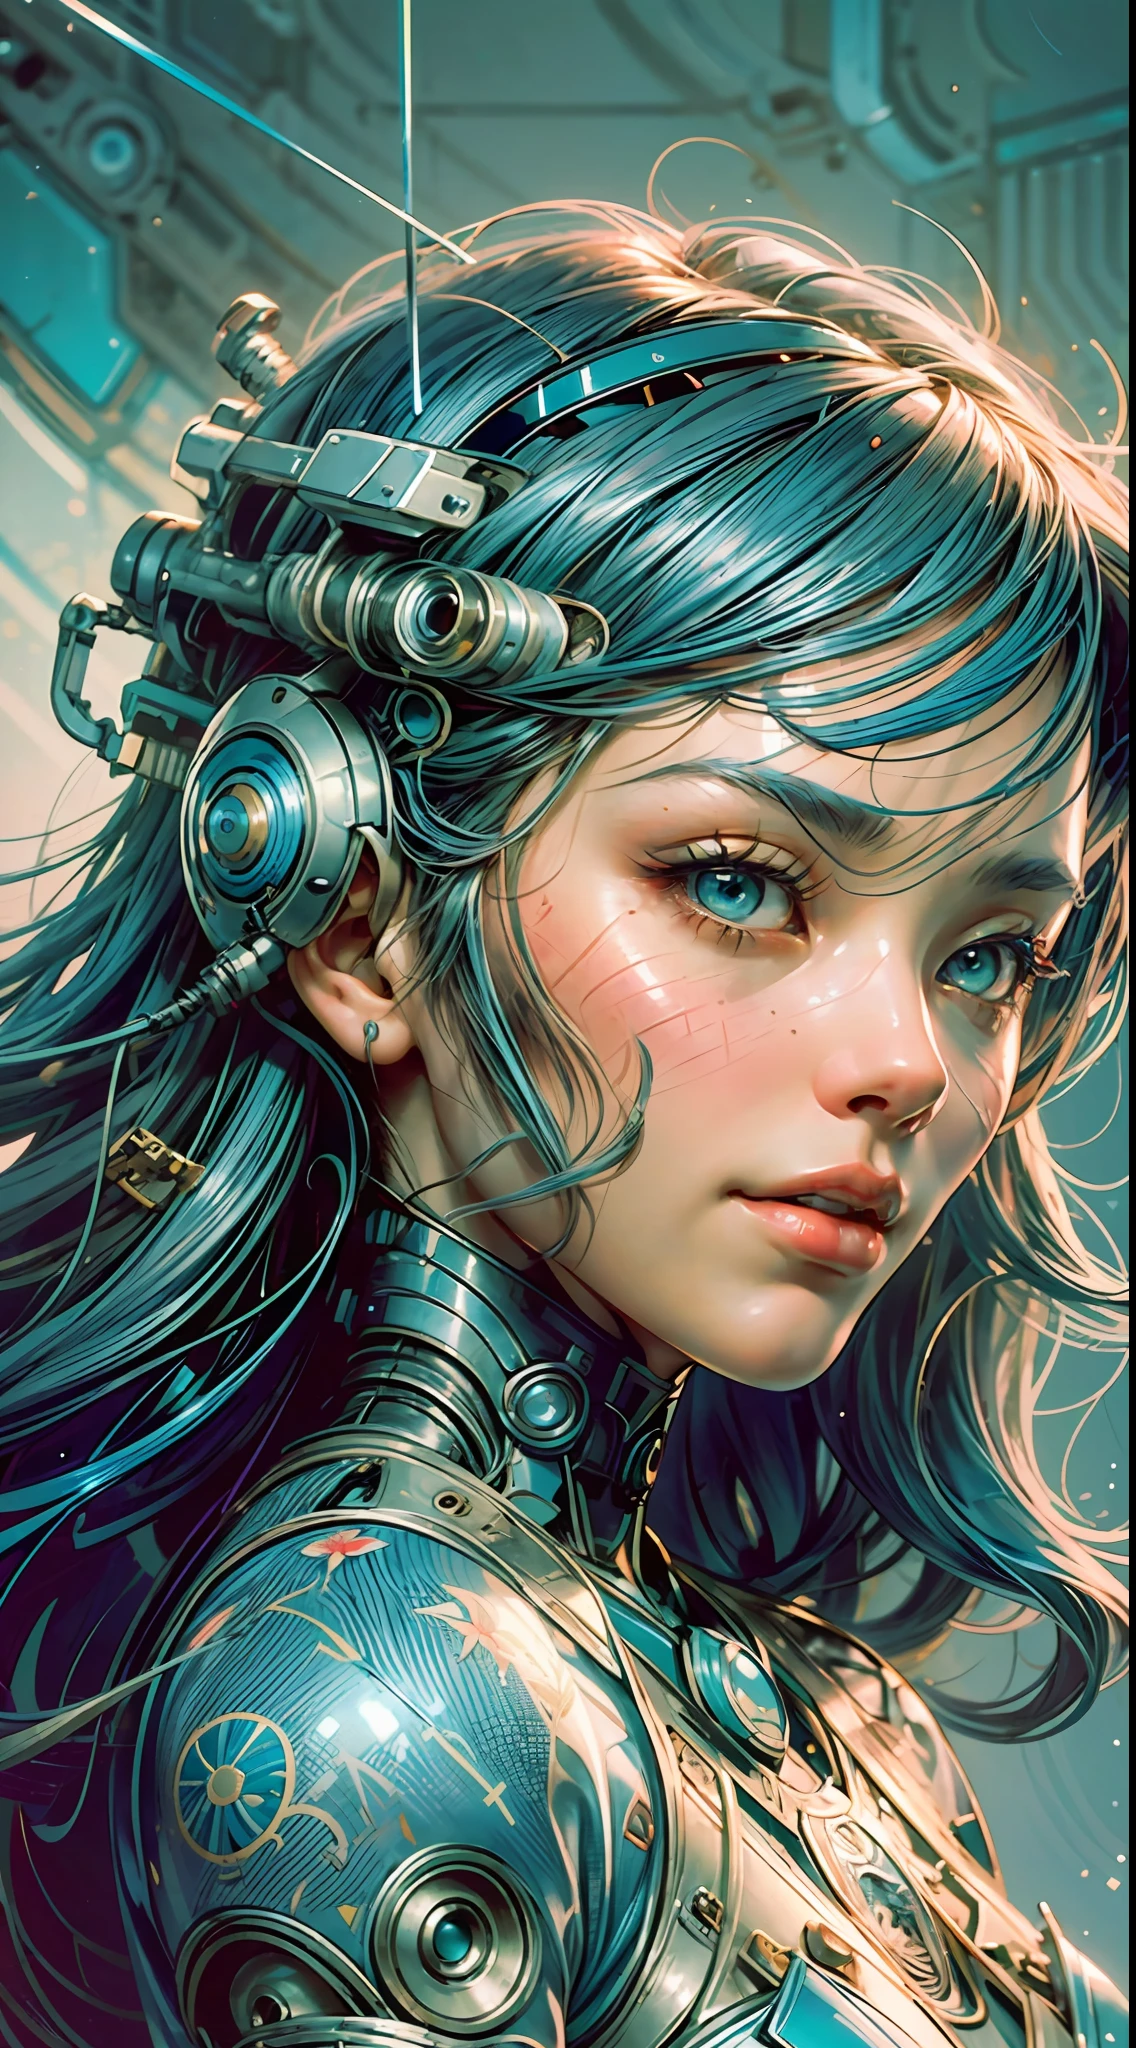 painting of a cyborg woman with a blue hair and a flower in her hair with cyber arms de costas, artgerm and james jean, anna dittmann alberto vargas, in style of anna dittmann, beautiful retro art, a beautiful artwork illustration, inspired by James Jean, james jean and wlop, james jean soft light 4 k, james jean soft light 4k, beautiful digital artwork